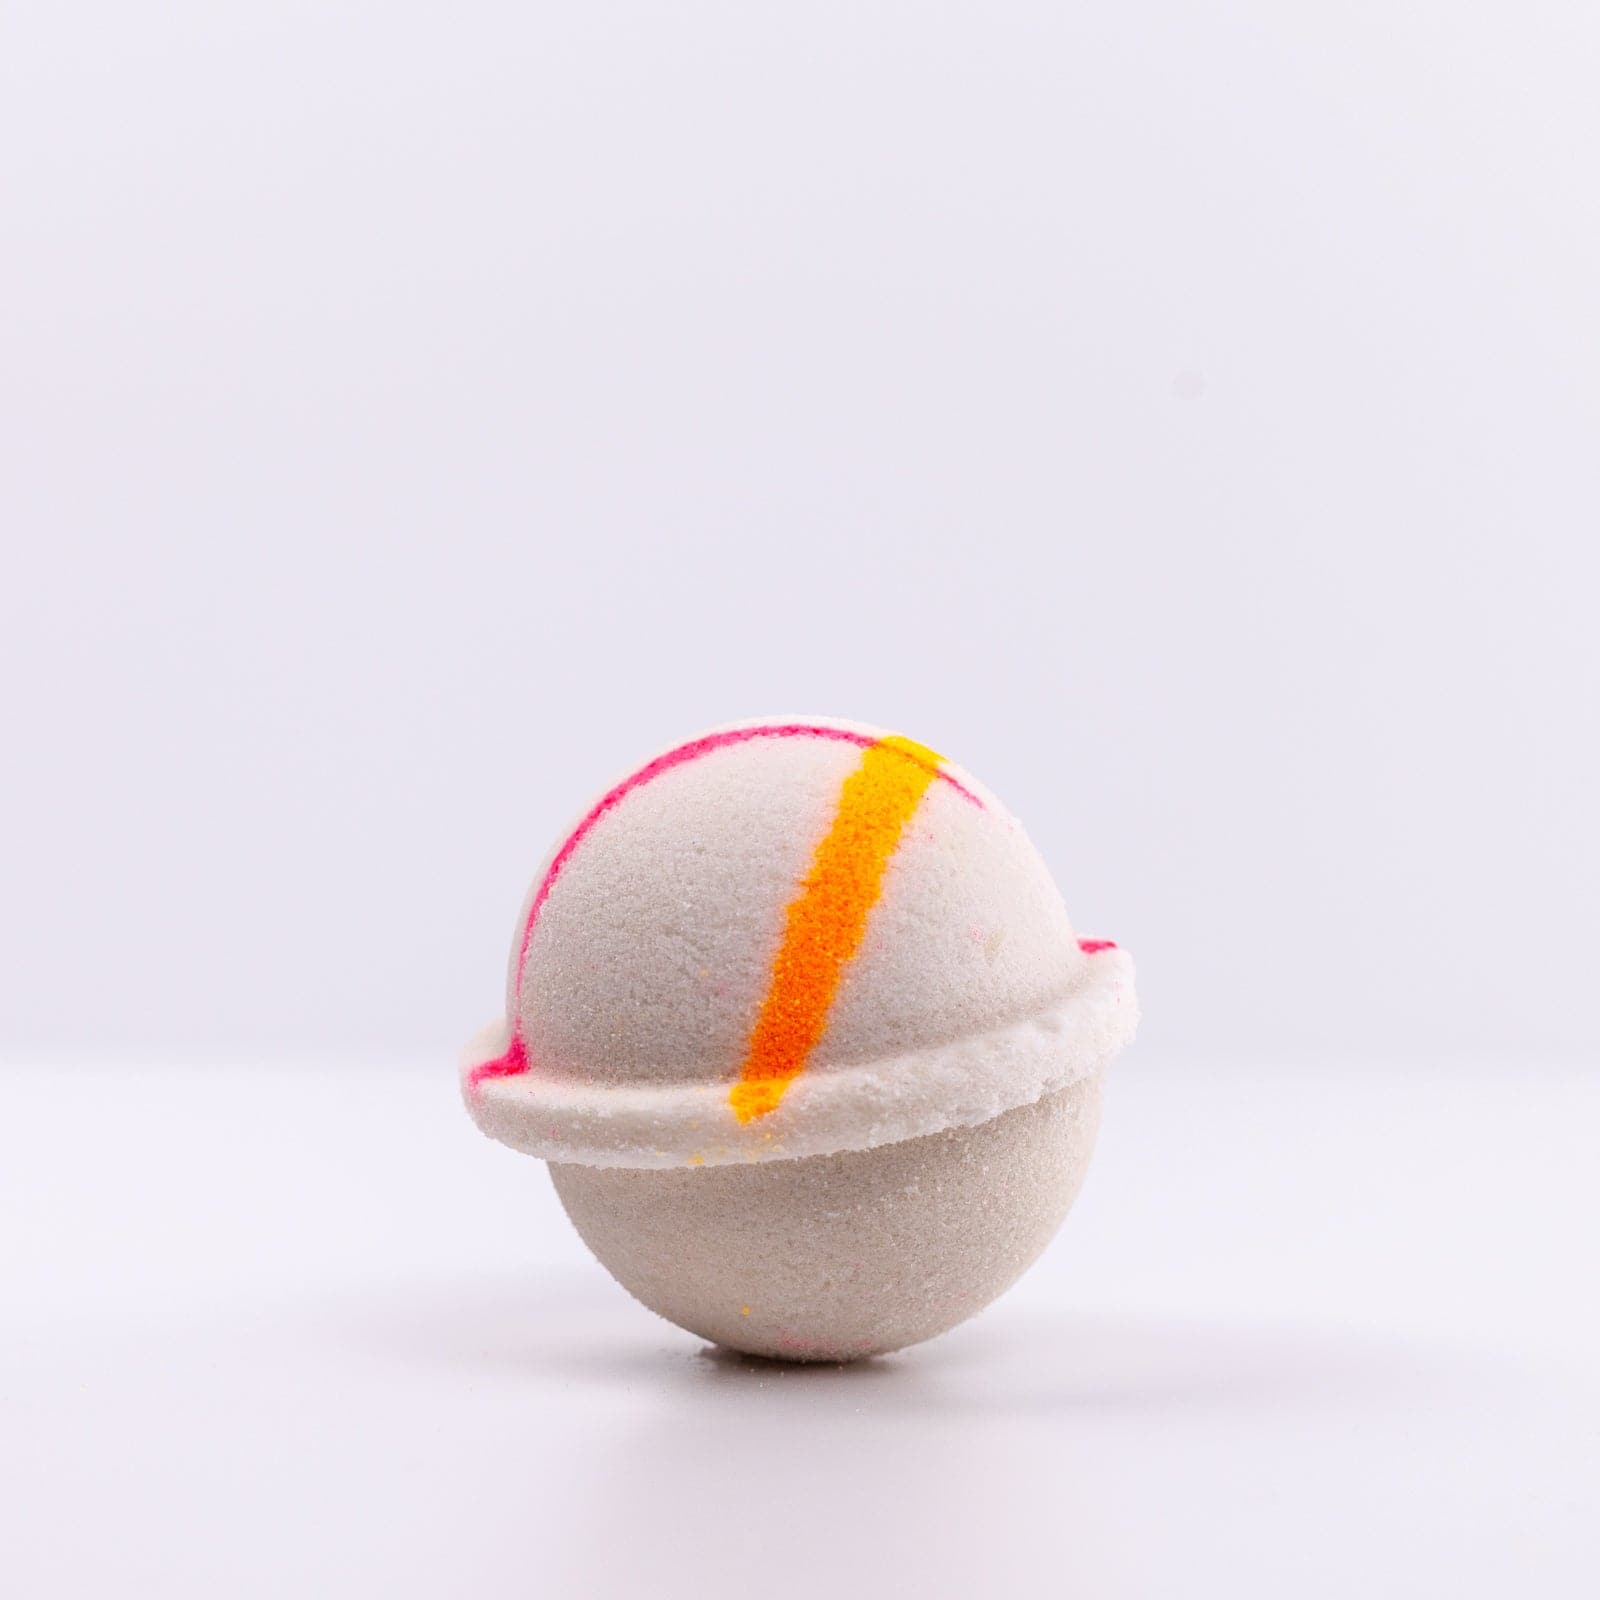 Island Nectar Bath Bomb with pink and yellow design against white background